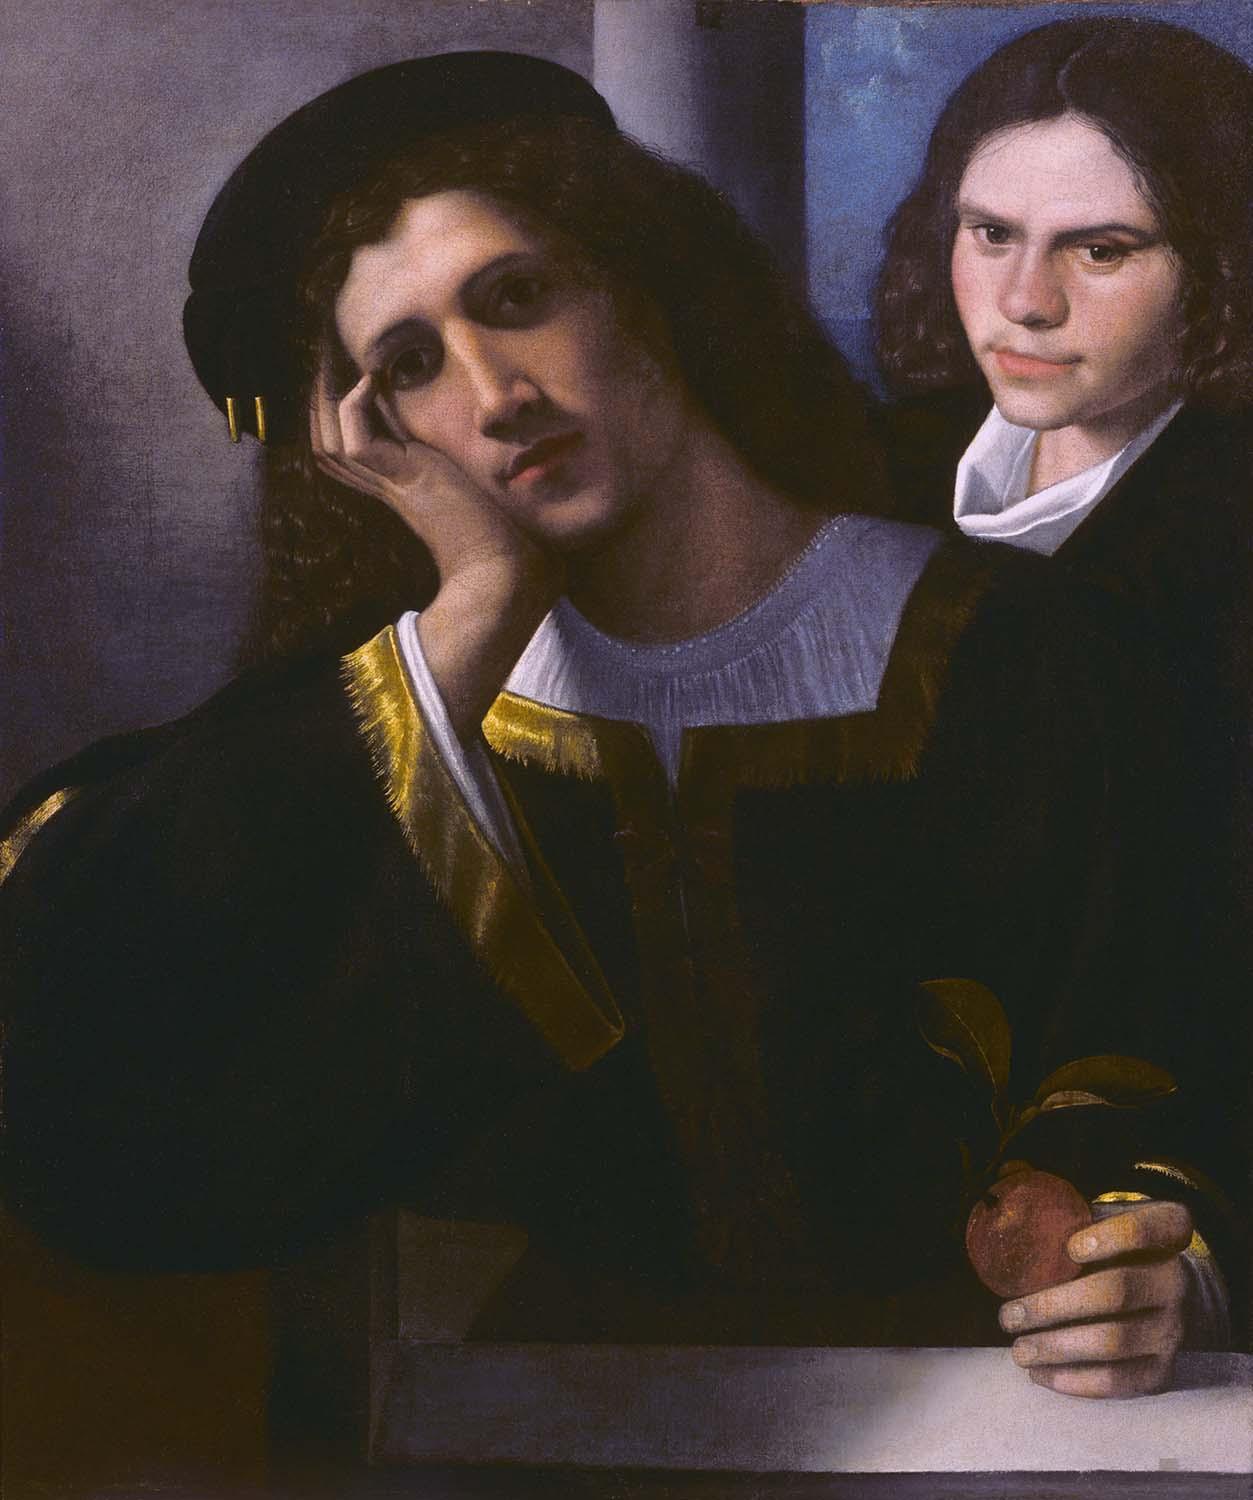 The two friends by Giorgione